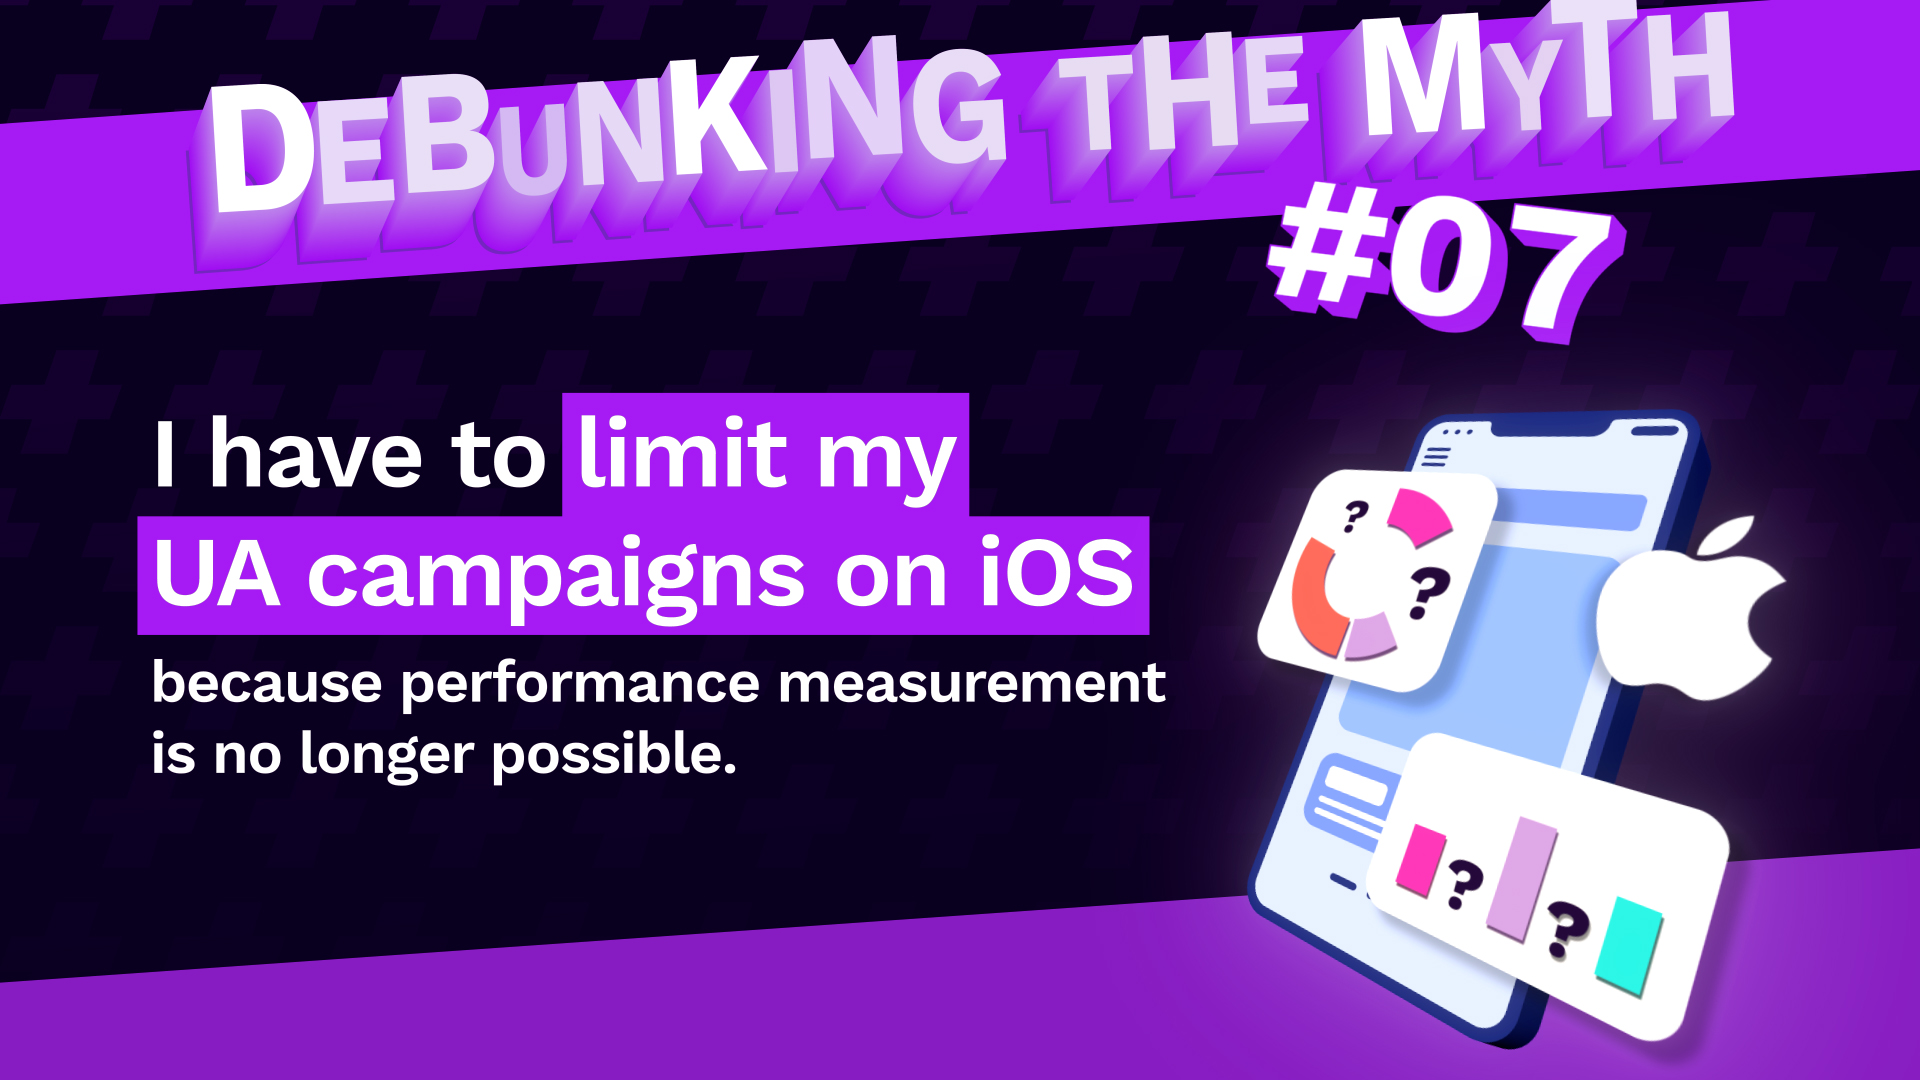 DTM #7: I have to limit my UA campaigns on iOS because performance measurement is no longer possible